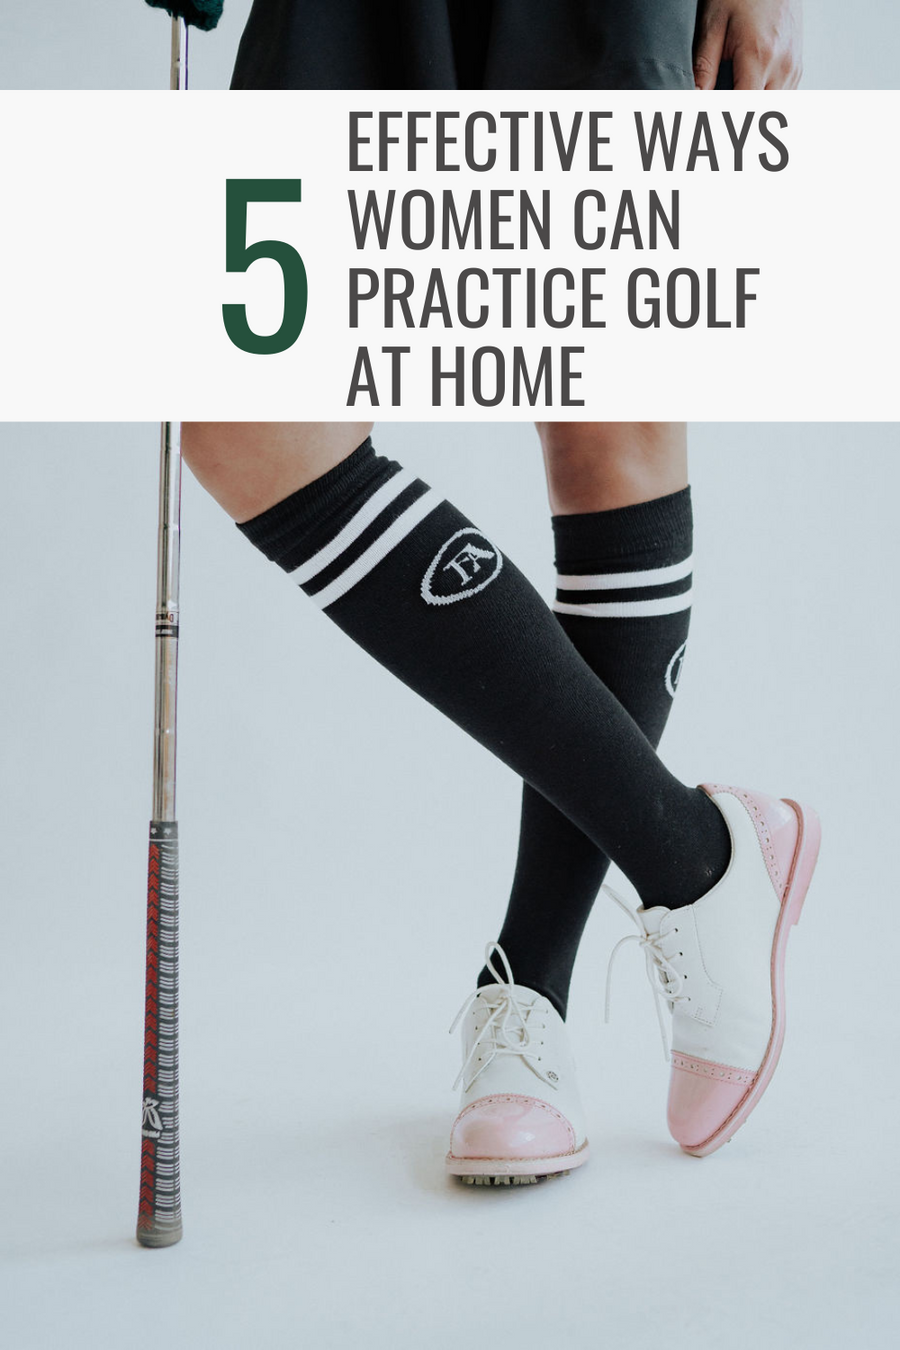 5 Effective Ways Women Can Practice Golf at Home and Improve Their Game